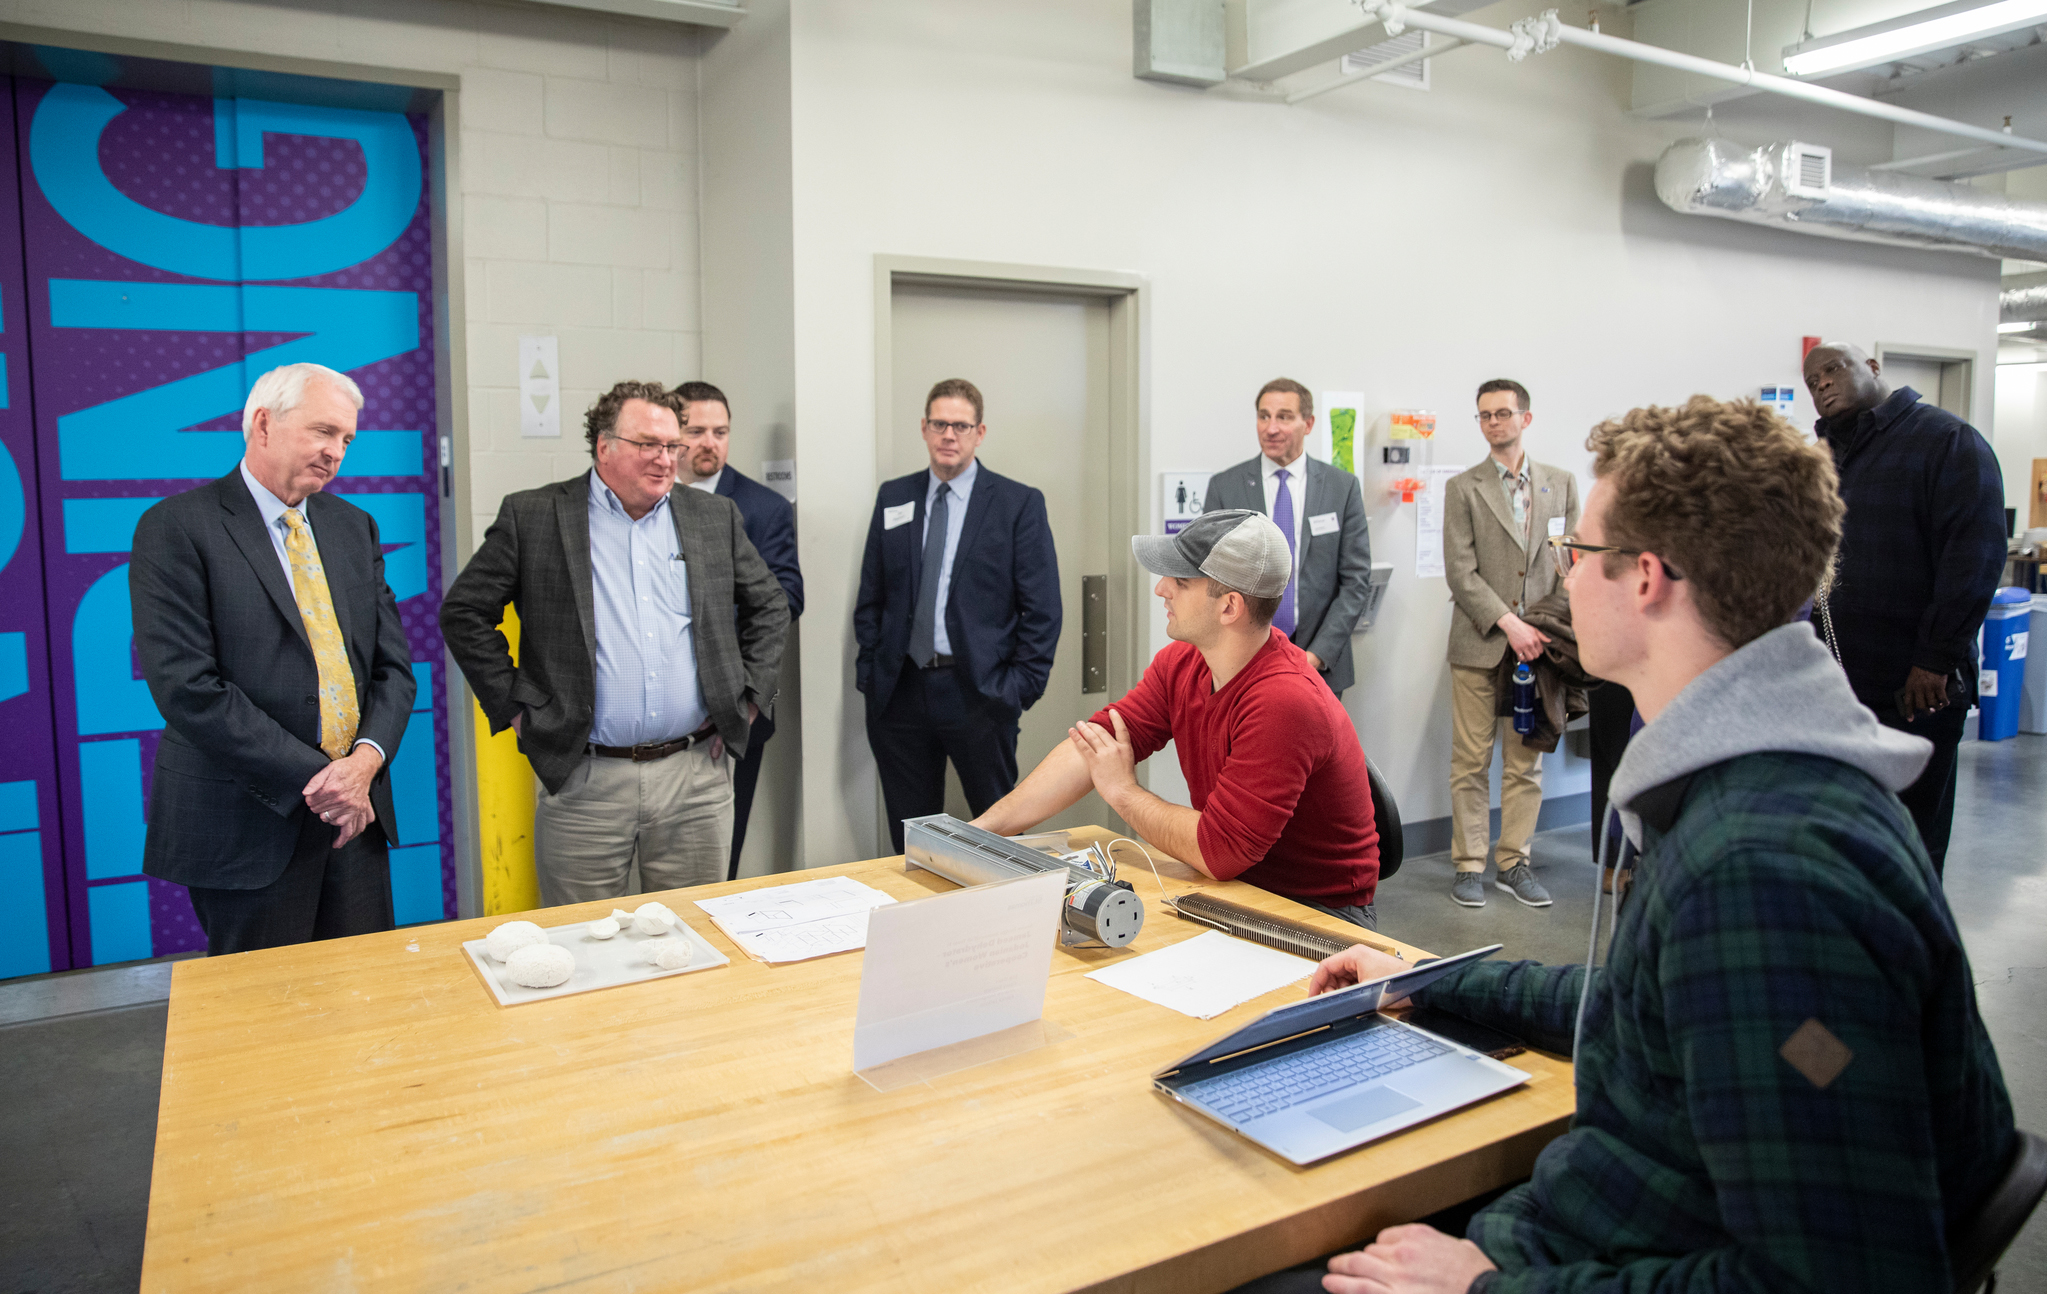 Xcel Energy CEO Ben Fowke and Engineering Dean Don Weinkauf listen as students discuss their senior design project during a tour of the School of Engineering’s microgrid solar panel array in the Facilities and Design Center in St. Paul on November 1, 2019. 